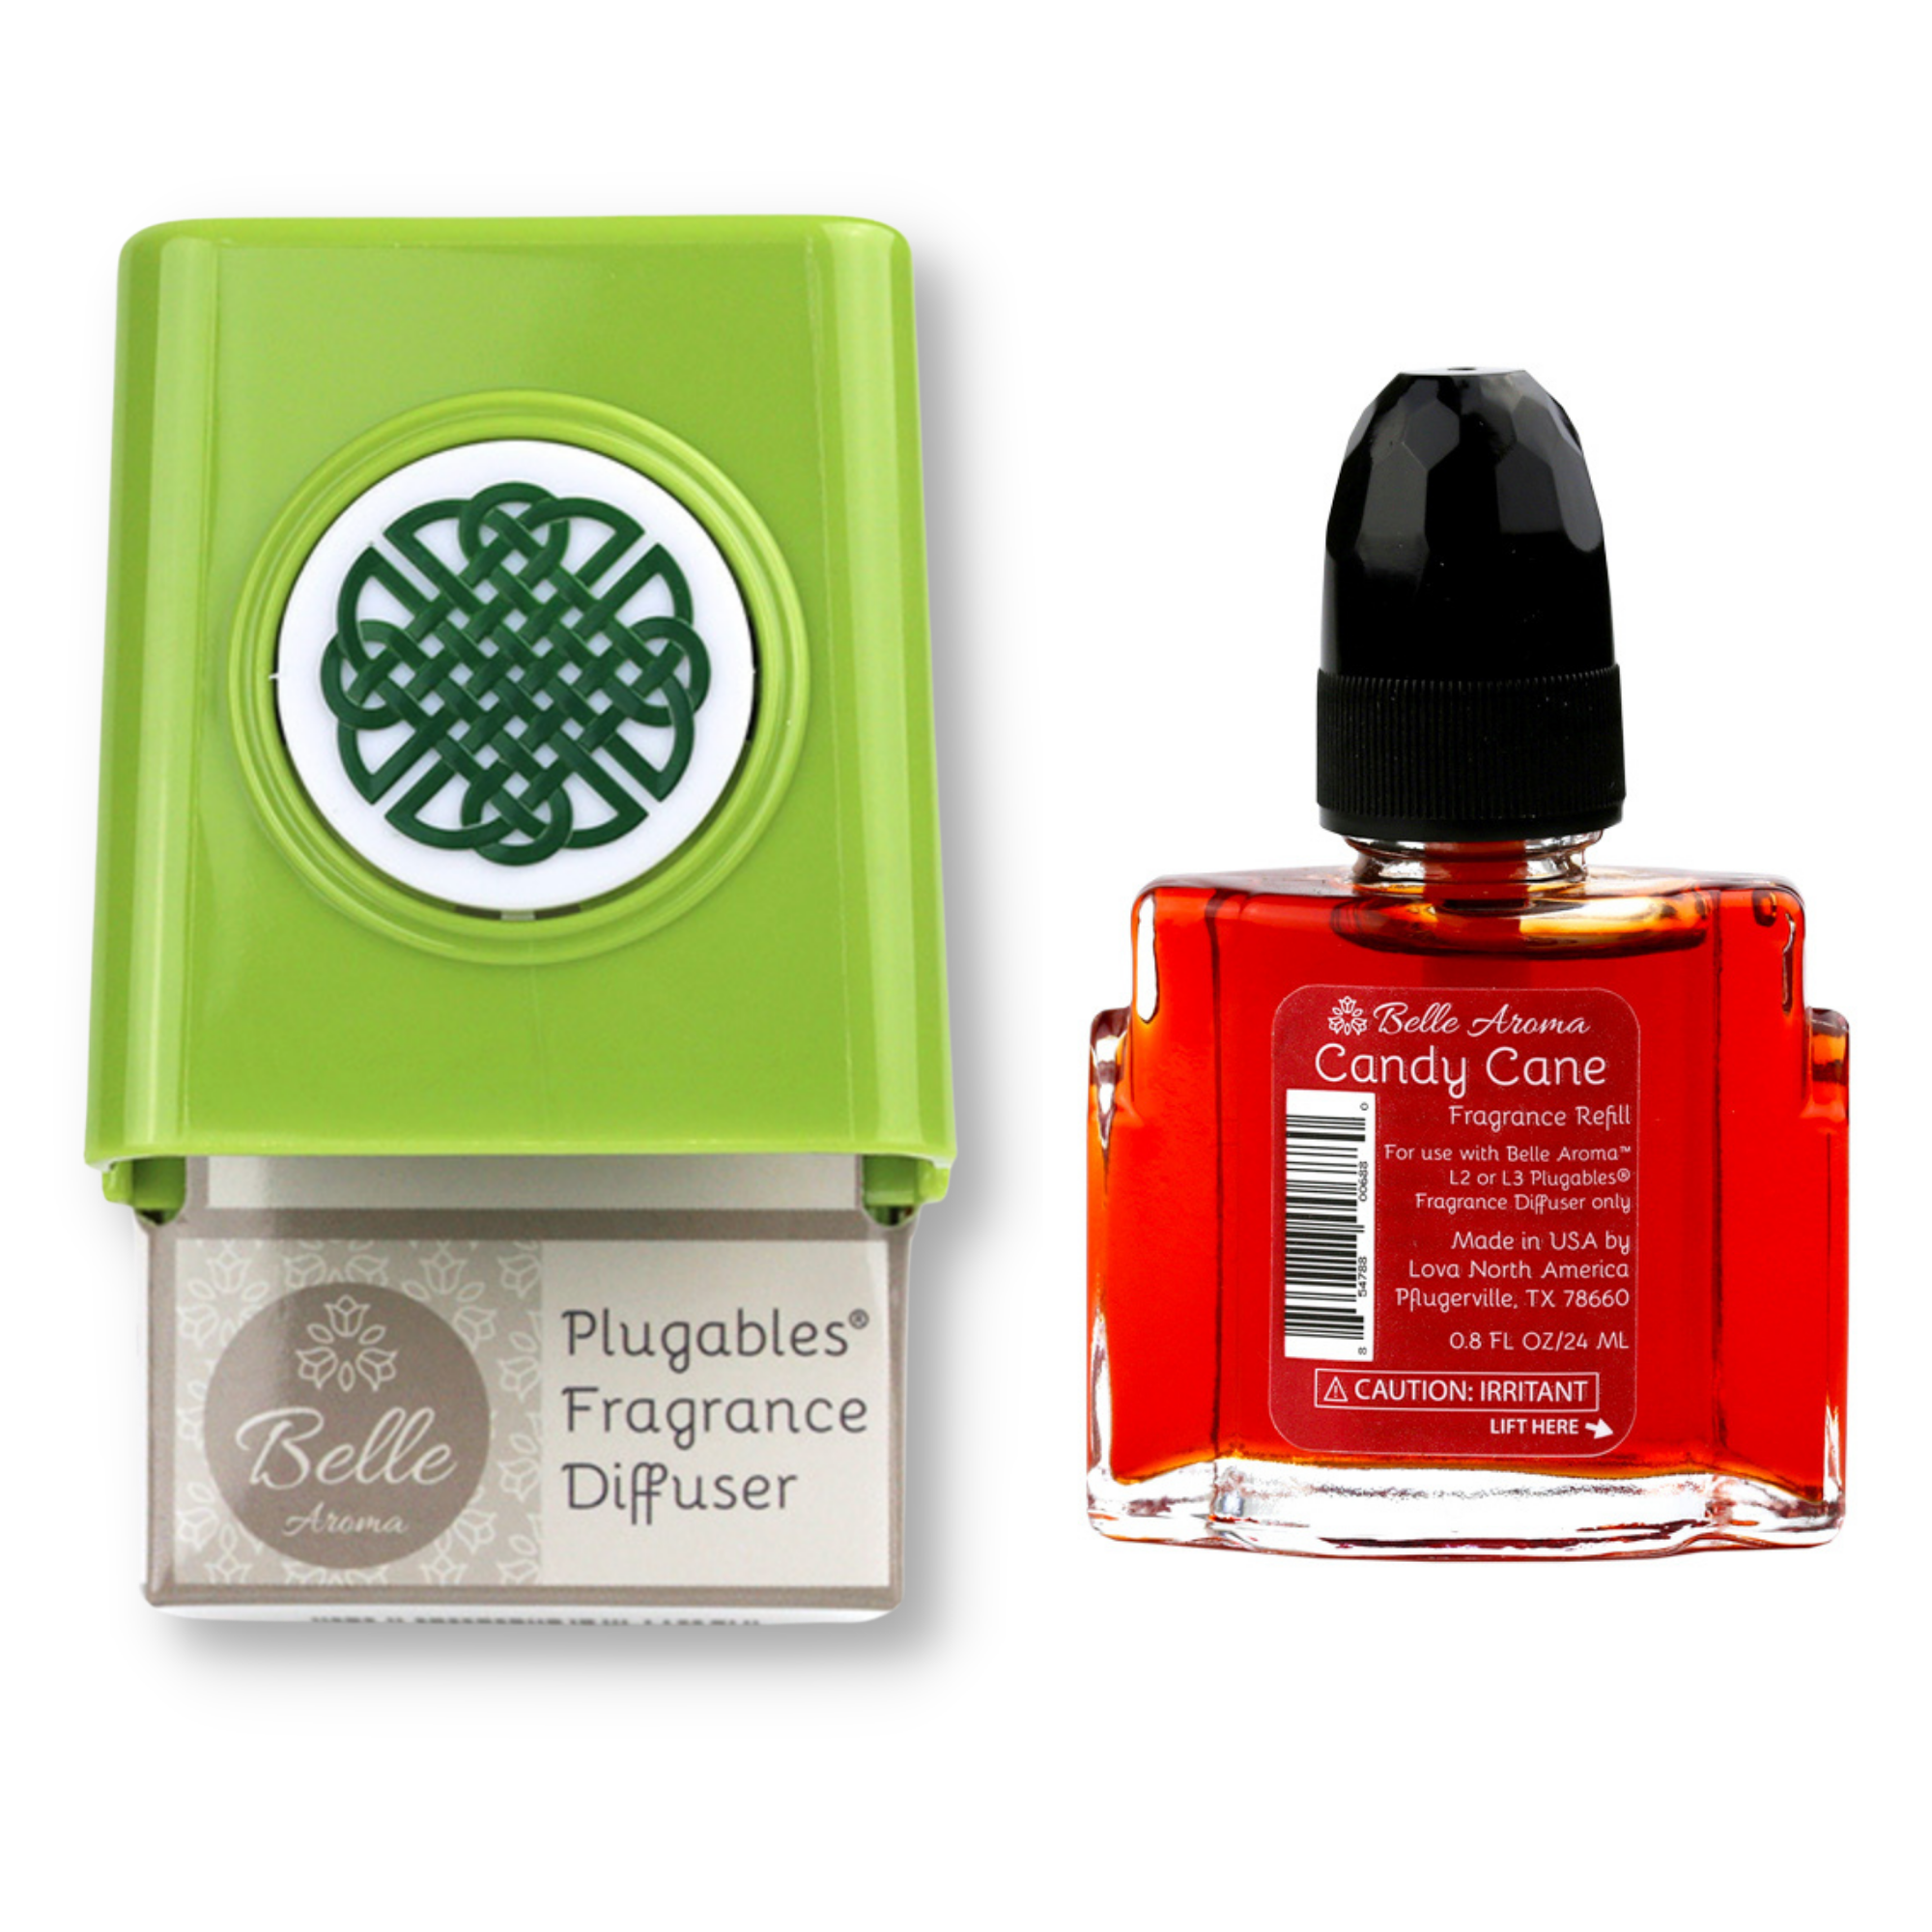 Celtic Knot Medallion Plugables® Plugin Electric Scented Oil Diffuser - Granny Smith with Candy Cane Fragrance Oil Home Fragrance Accessories